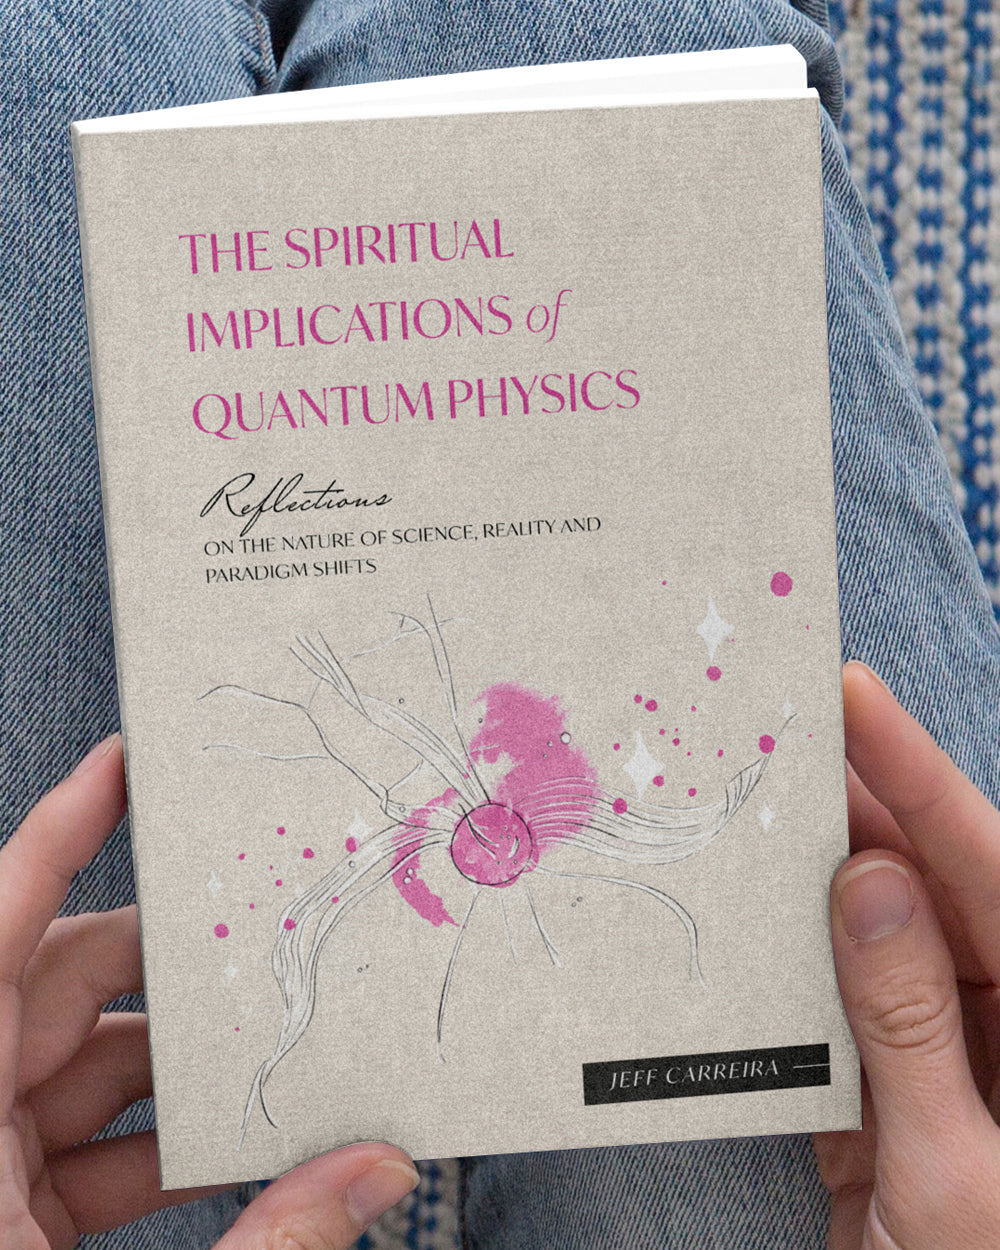 The Spiritual Implications of Quantum Physics: Reflections on the Nature of Science, Reality and Paradigm Shifts